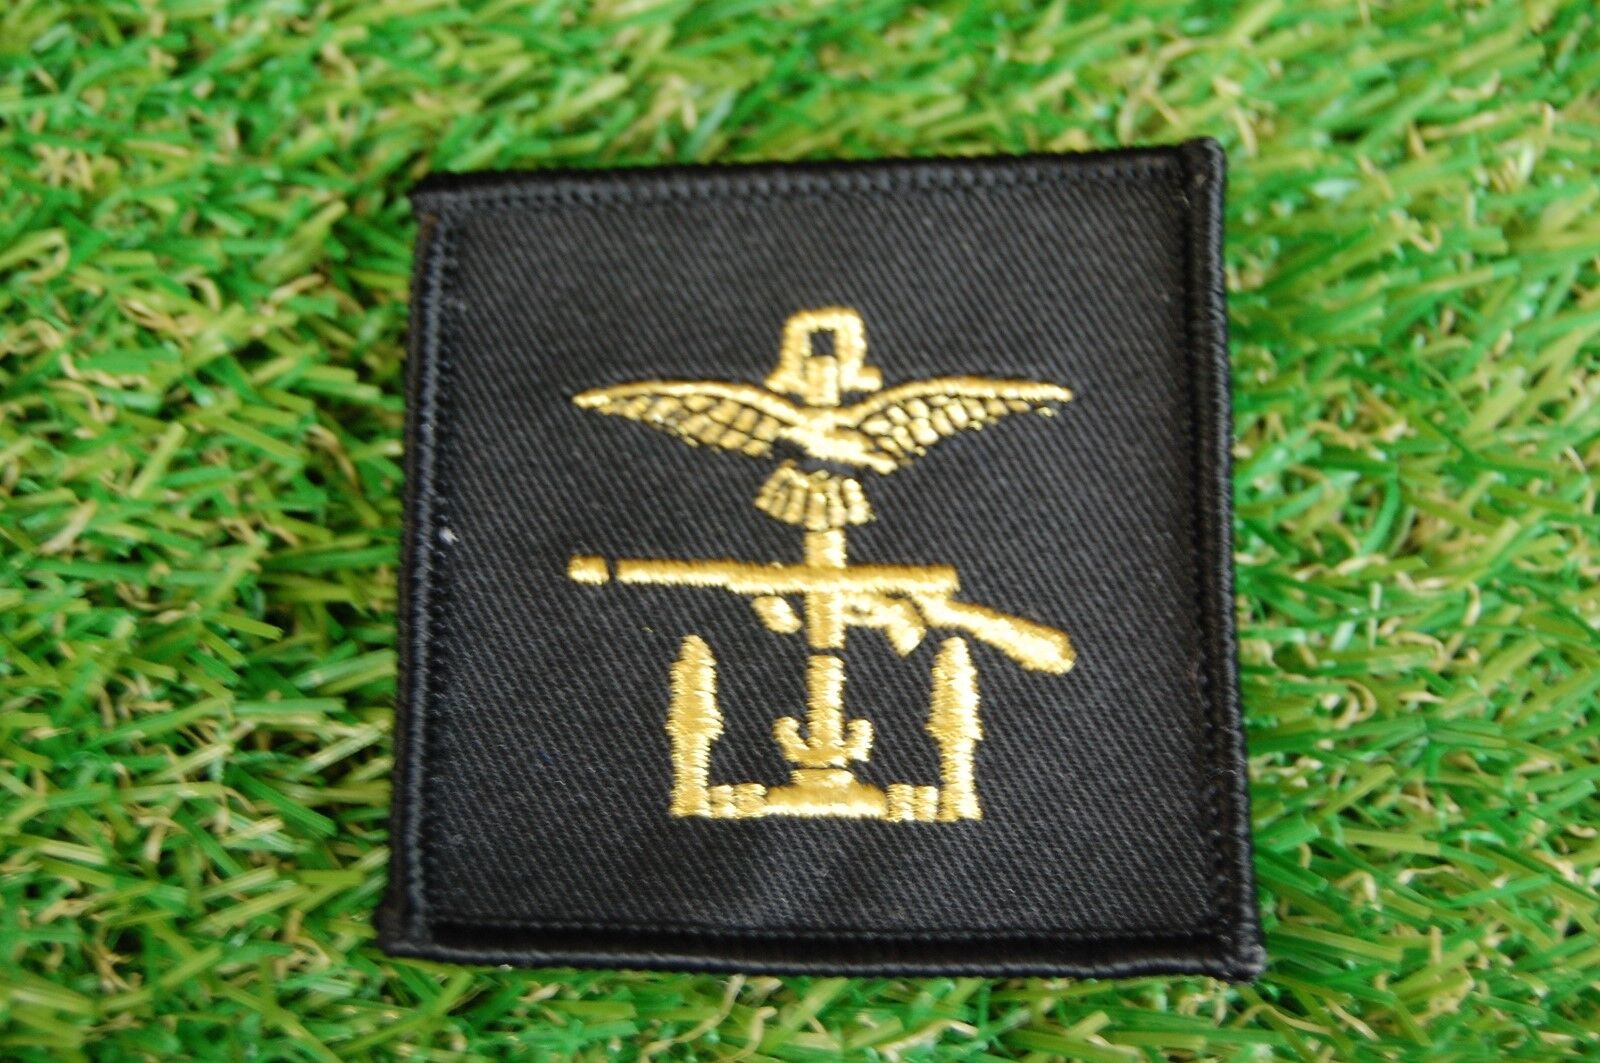 New - British Army Joint Forces Command - Tactical Recognition Flash - TRF